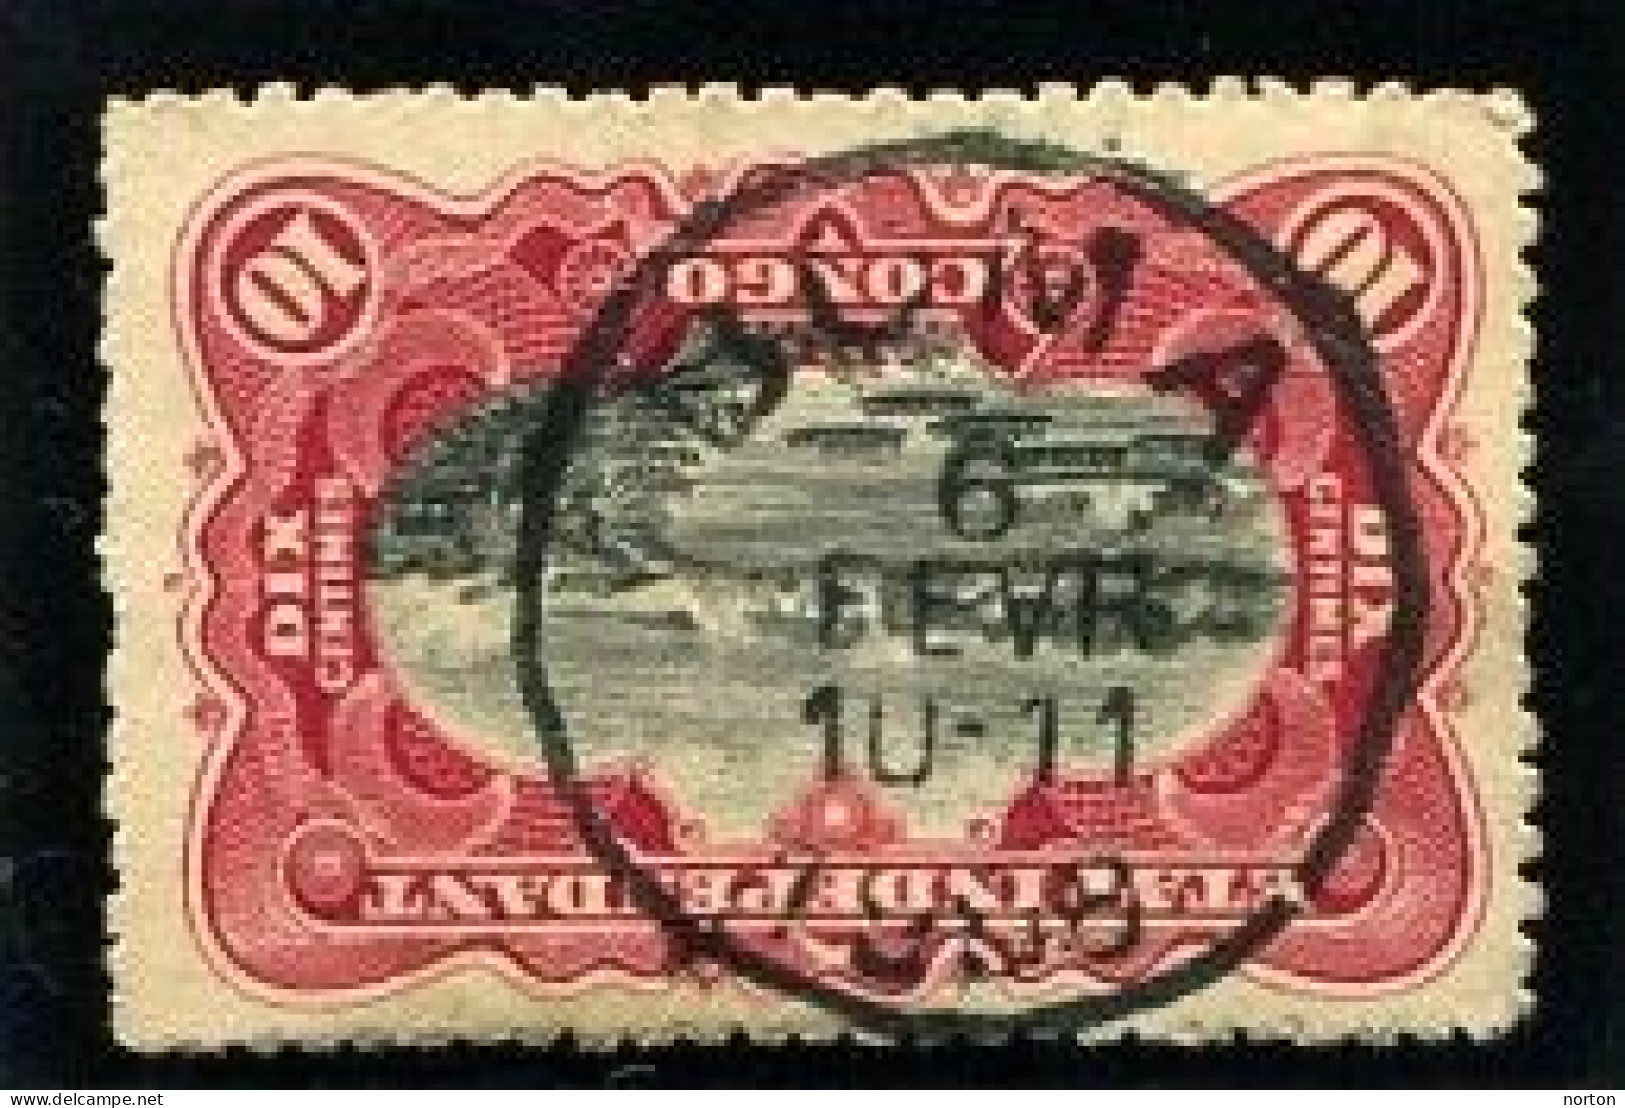 Congo Boma Oblit. Keach 1.6-DMtY Sur C.O.B. 19 Le 06/02/1906 - Used Stamps